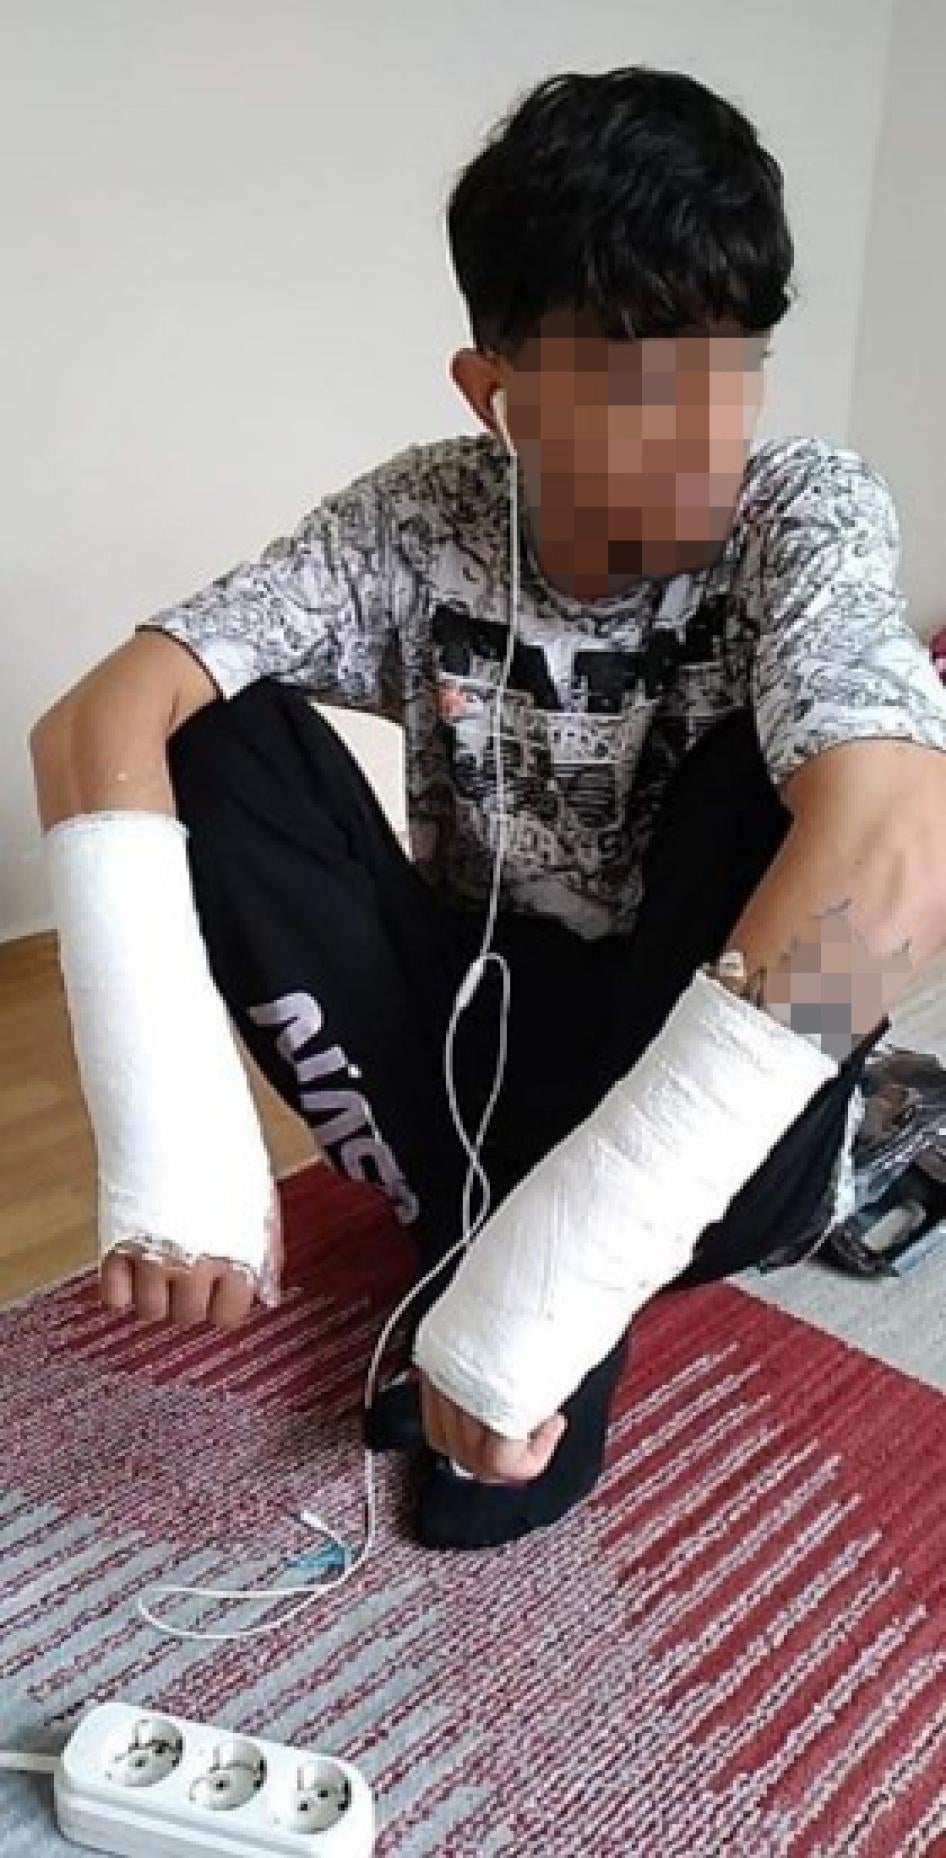 This 21-year-old Afghan man told Human Rights Watch he broke both wrists during an encounter with Bulgarian authorities on or around November 12, 2021 after crossing into Bulgaria from Turkey. His face has bruising, a black eye, and lacerations that cannot be shown to protect his identity. © 2021 private